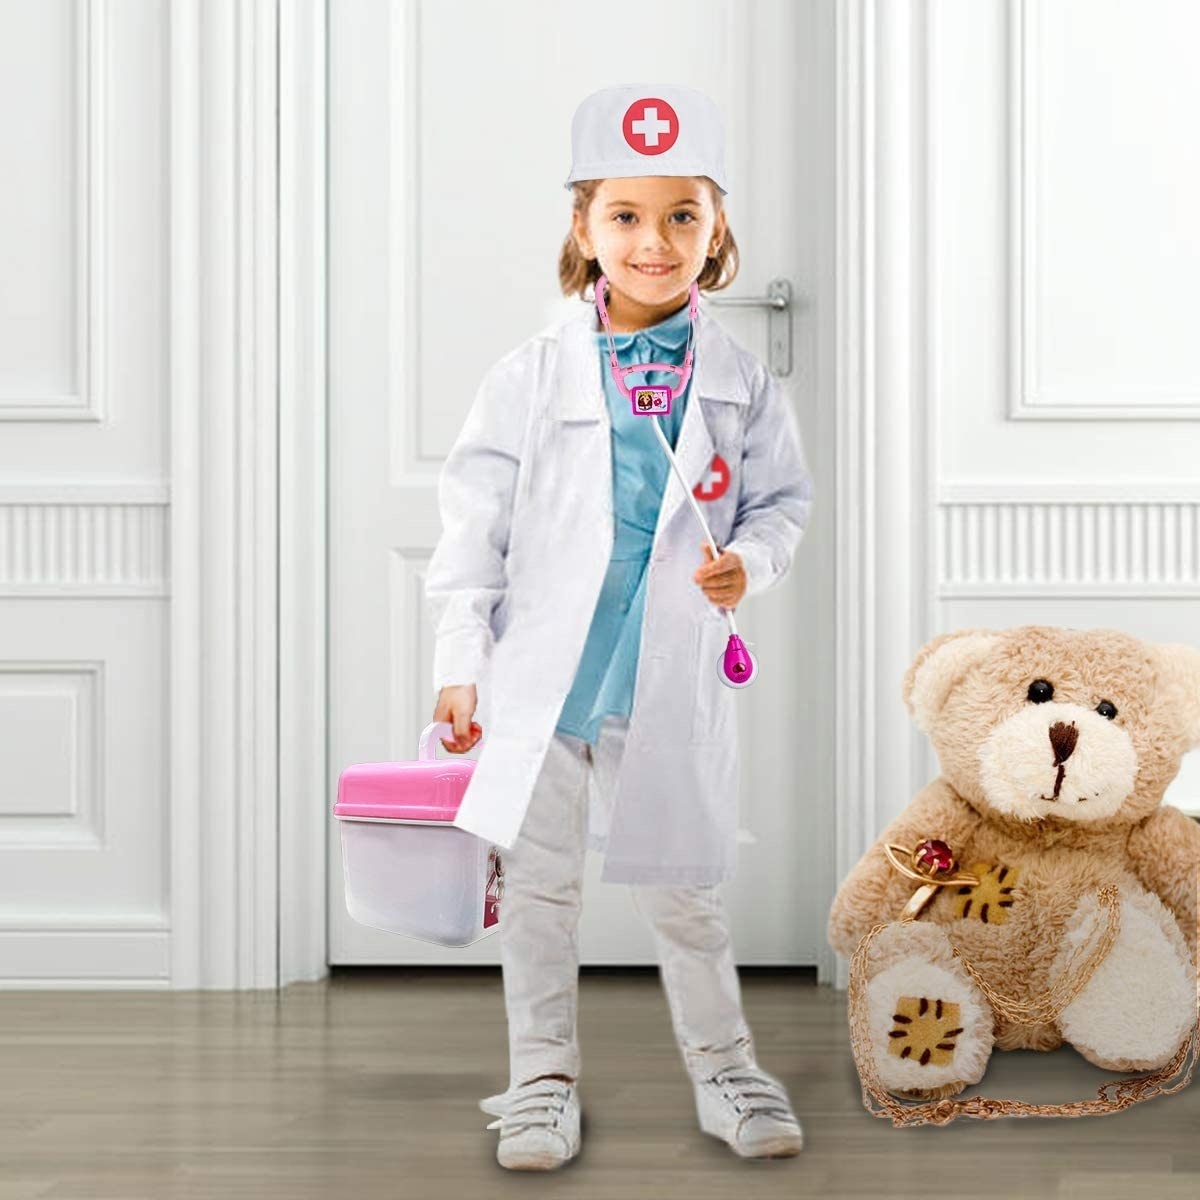 35-Pcs-Simulation-Medical-Role-Play-Pretend-Doctor-Game-Equipment-Set-Educational-Toy-with-Box-for-K-1730581-10